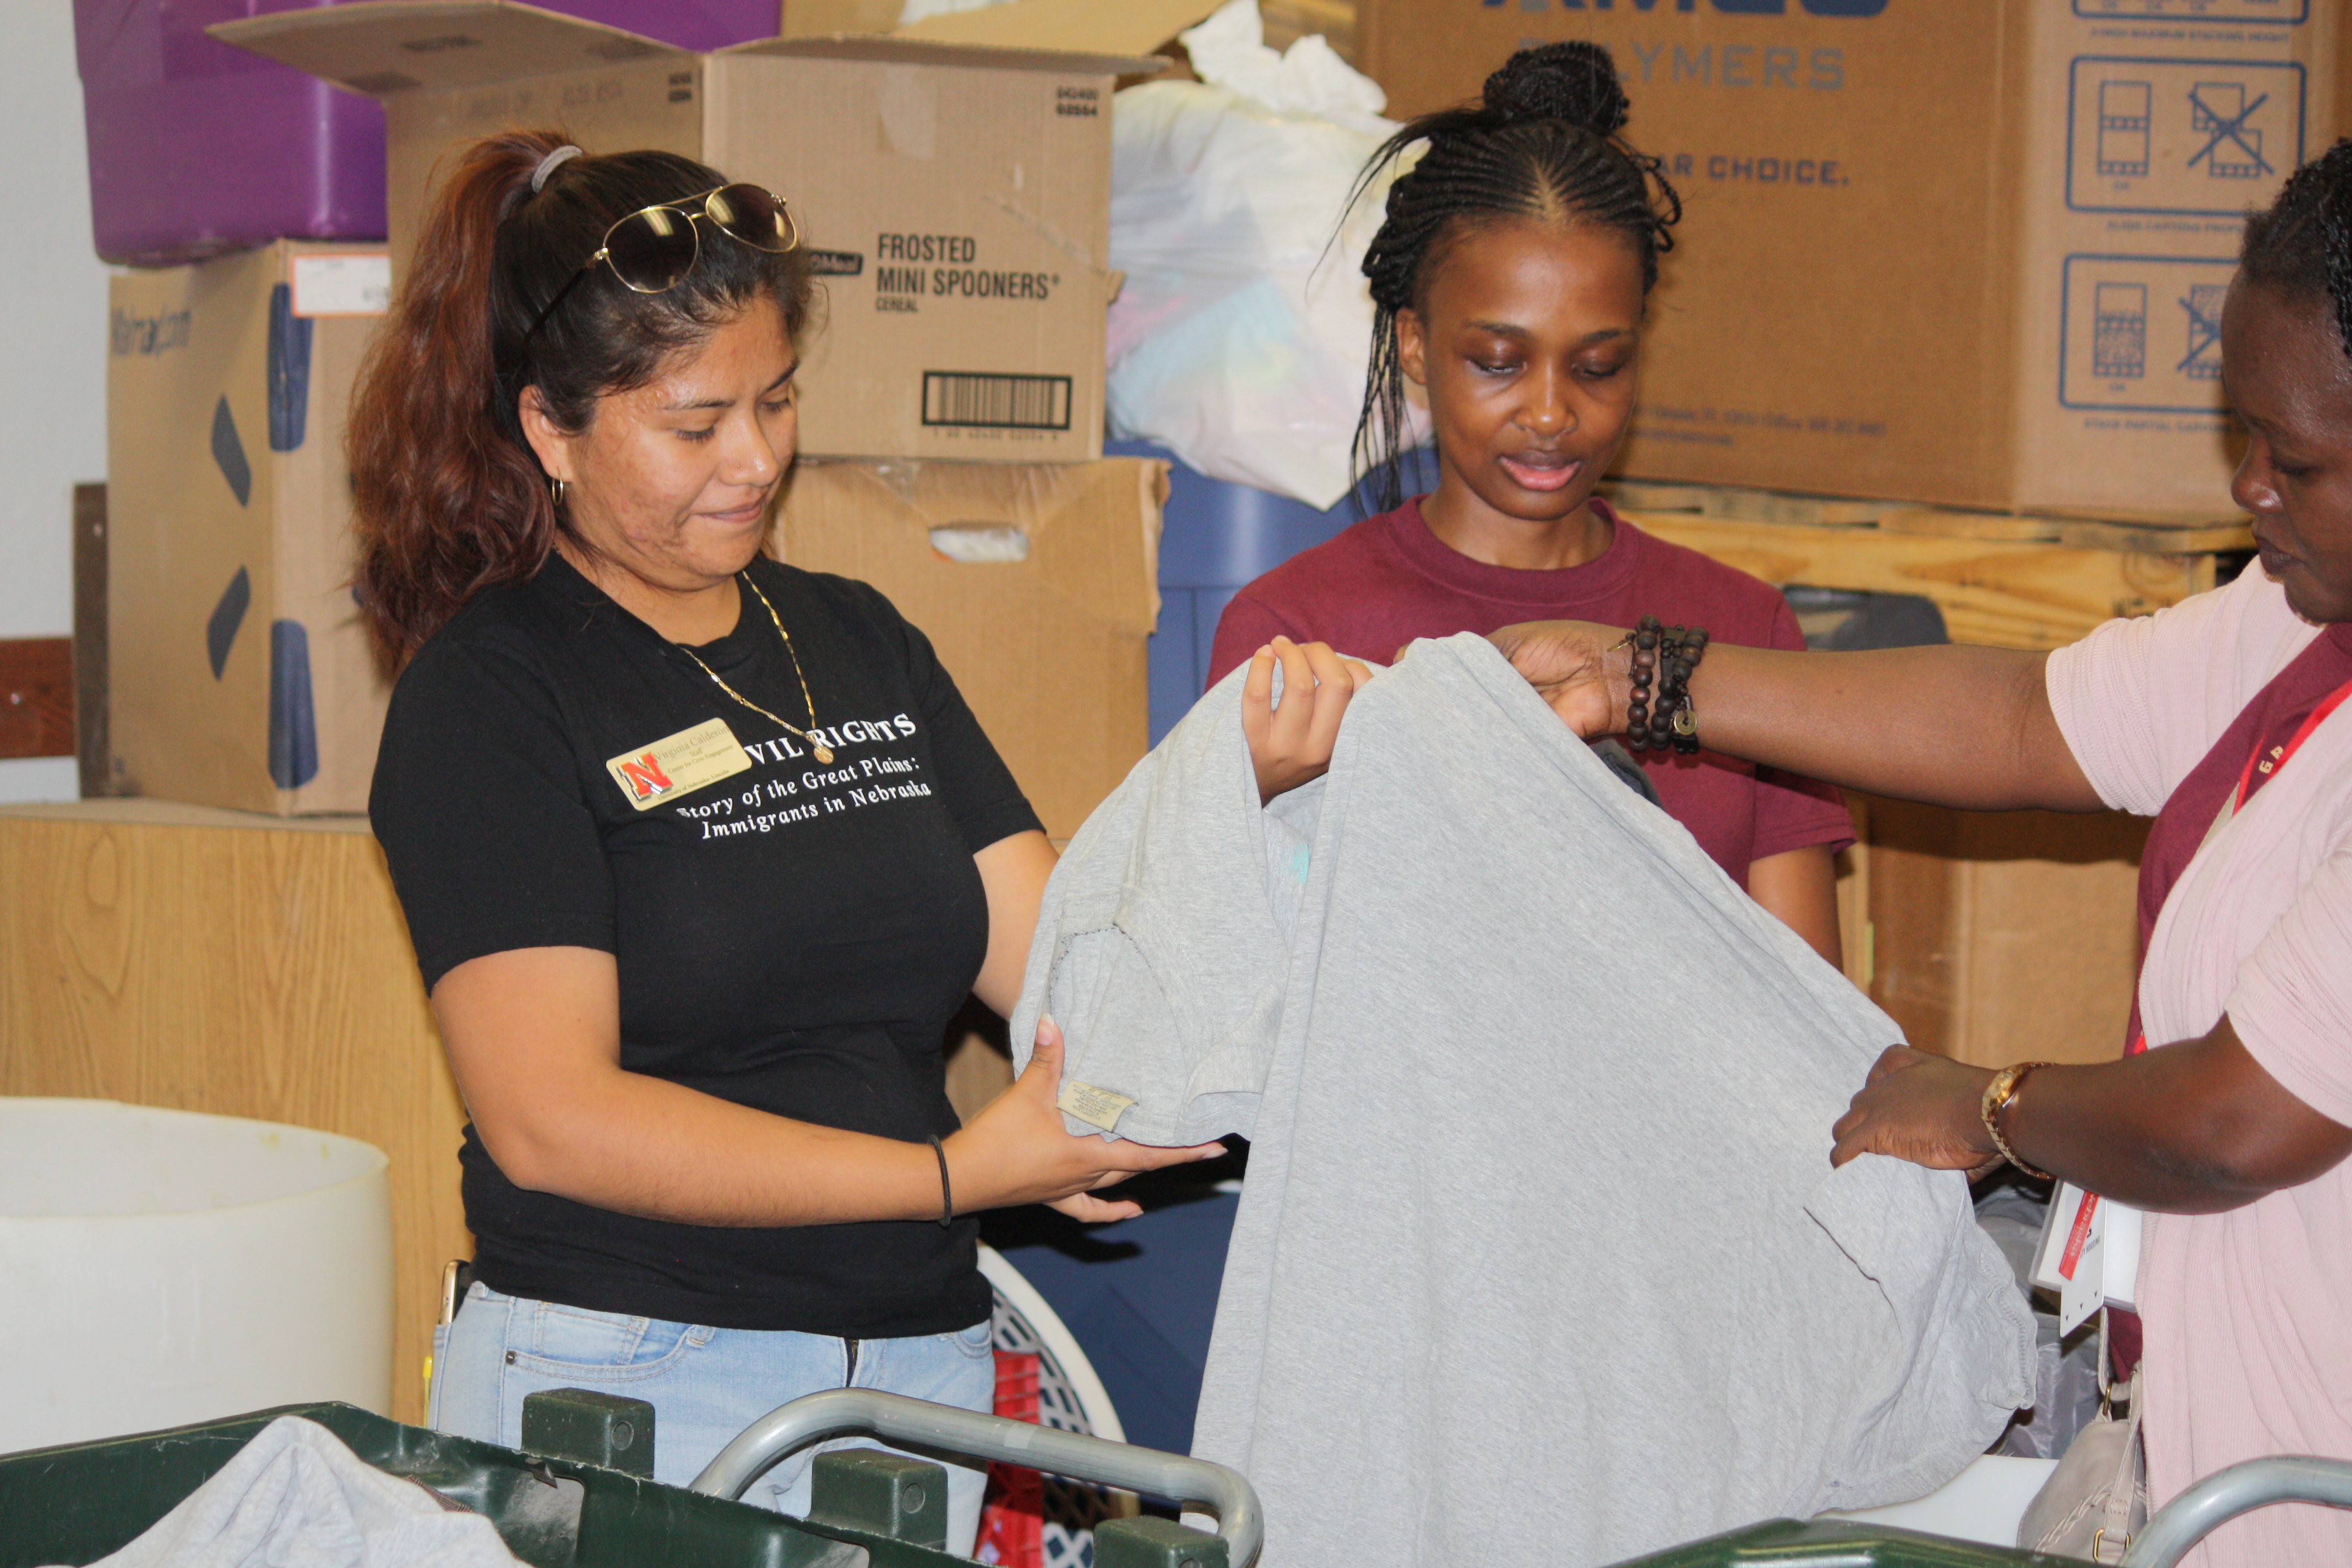 Volunteers with the Center for Civic Engagement assist the community by sorting clothing at a local thrift shop.